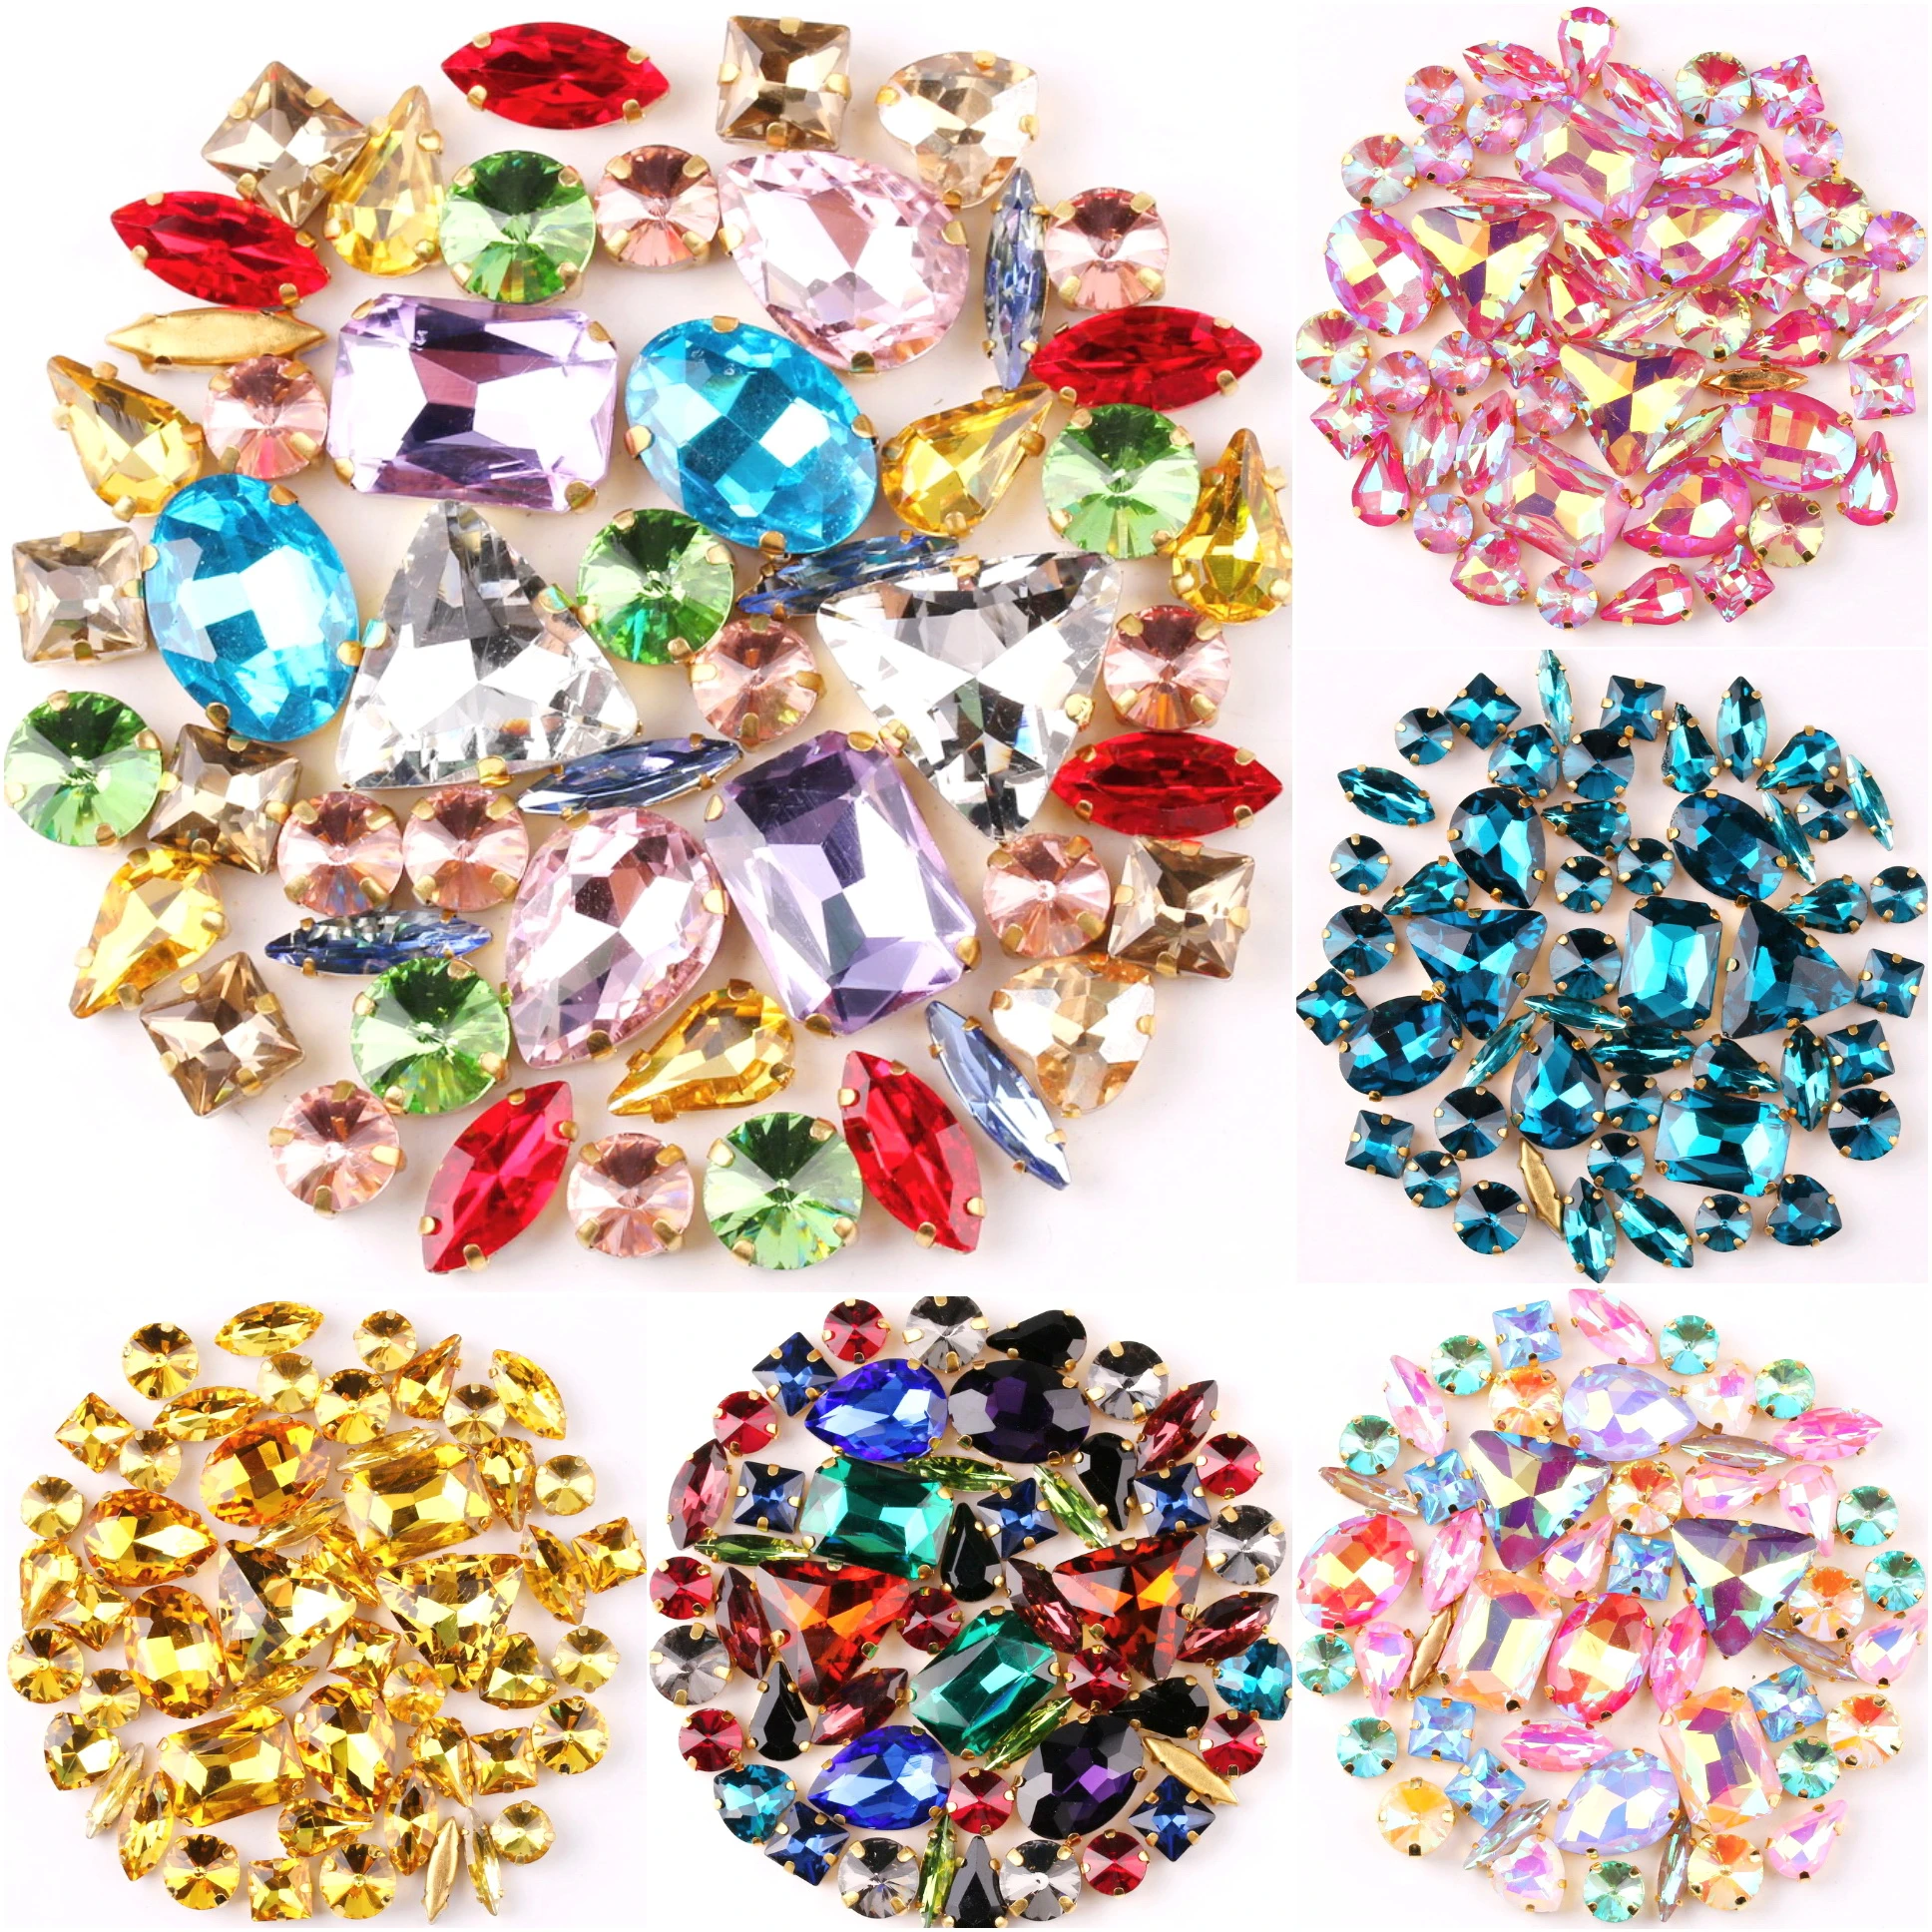 Gold claw setting 50pcs/bag shapes mix clear & jelly candy AB glass crystal sew on rhinestone wedding dress shoes bags diy trim